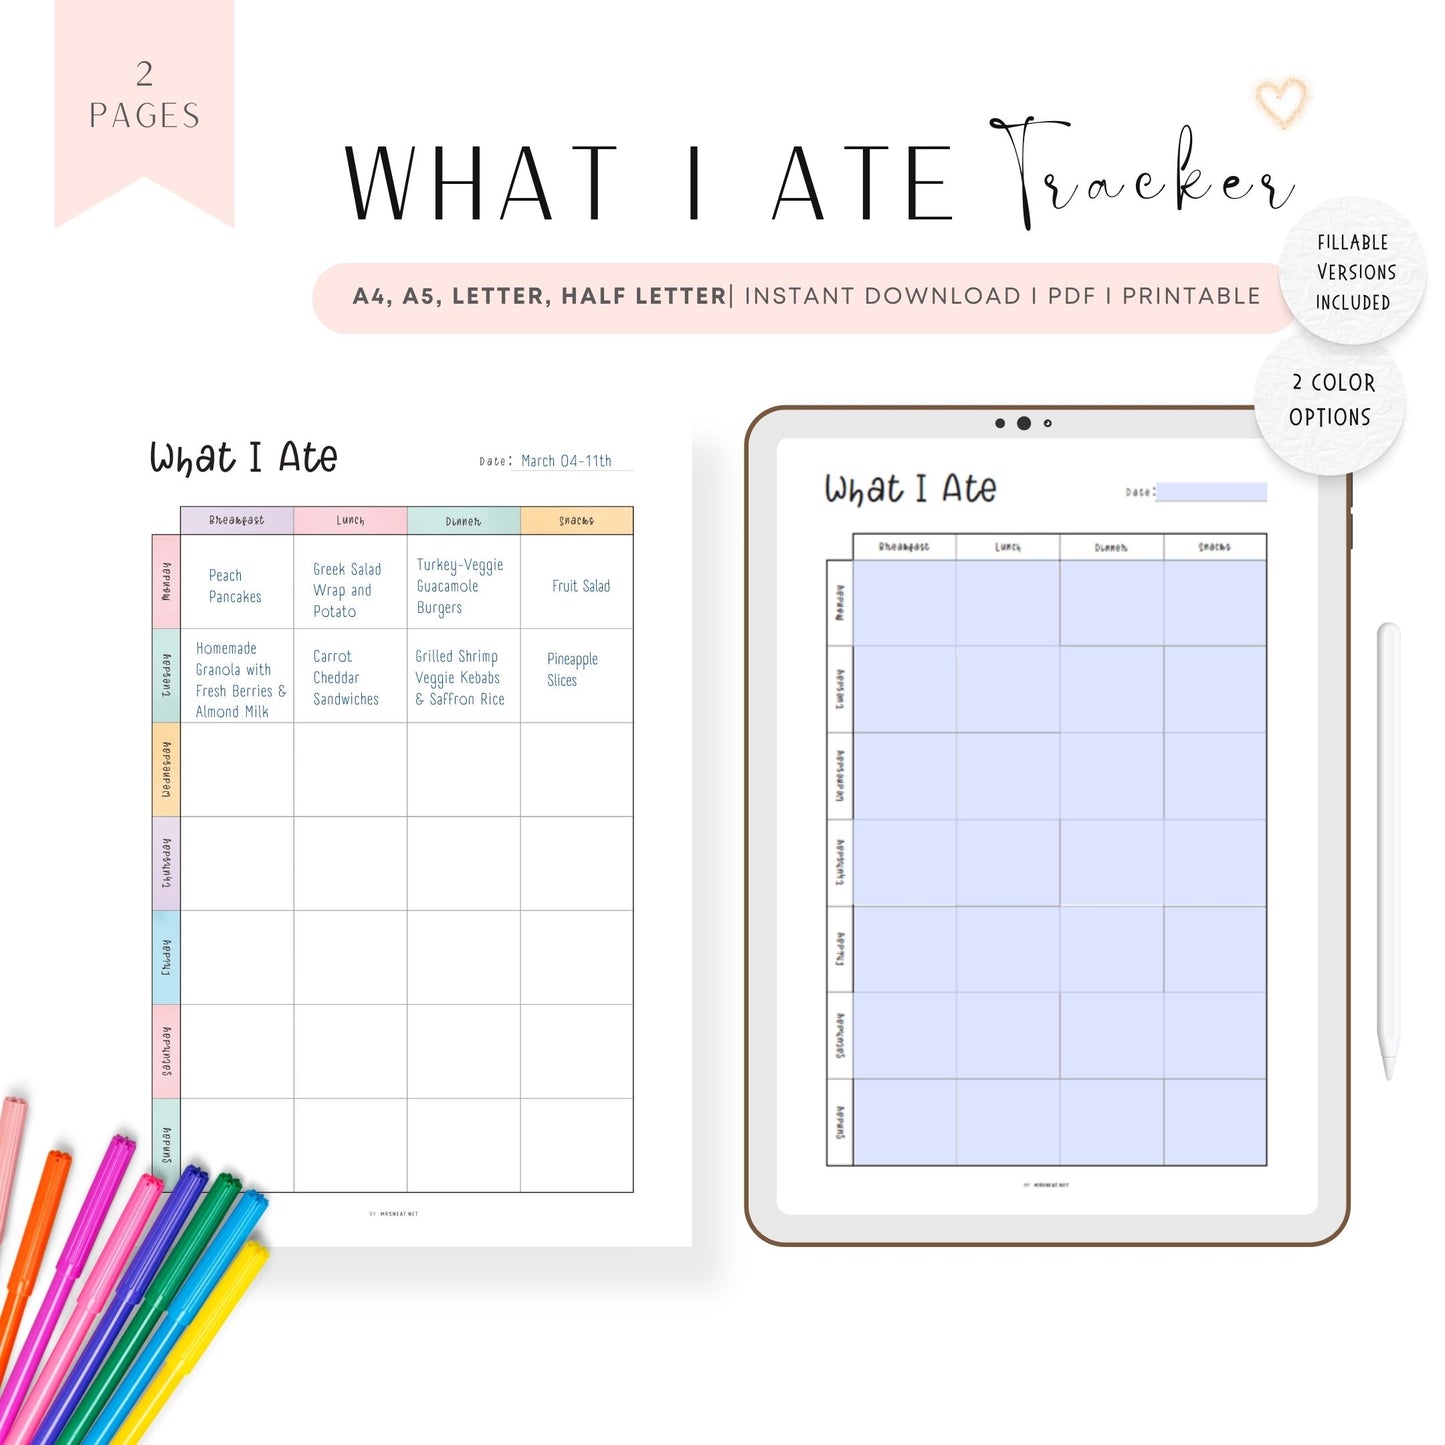 Food Journal Template Printable, A4, A5, Letter, Half Letter, 2 color options, fillable versions, printable inserts